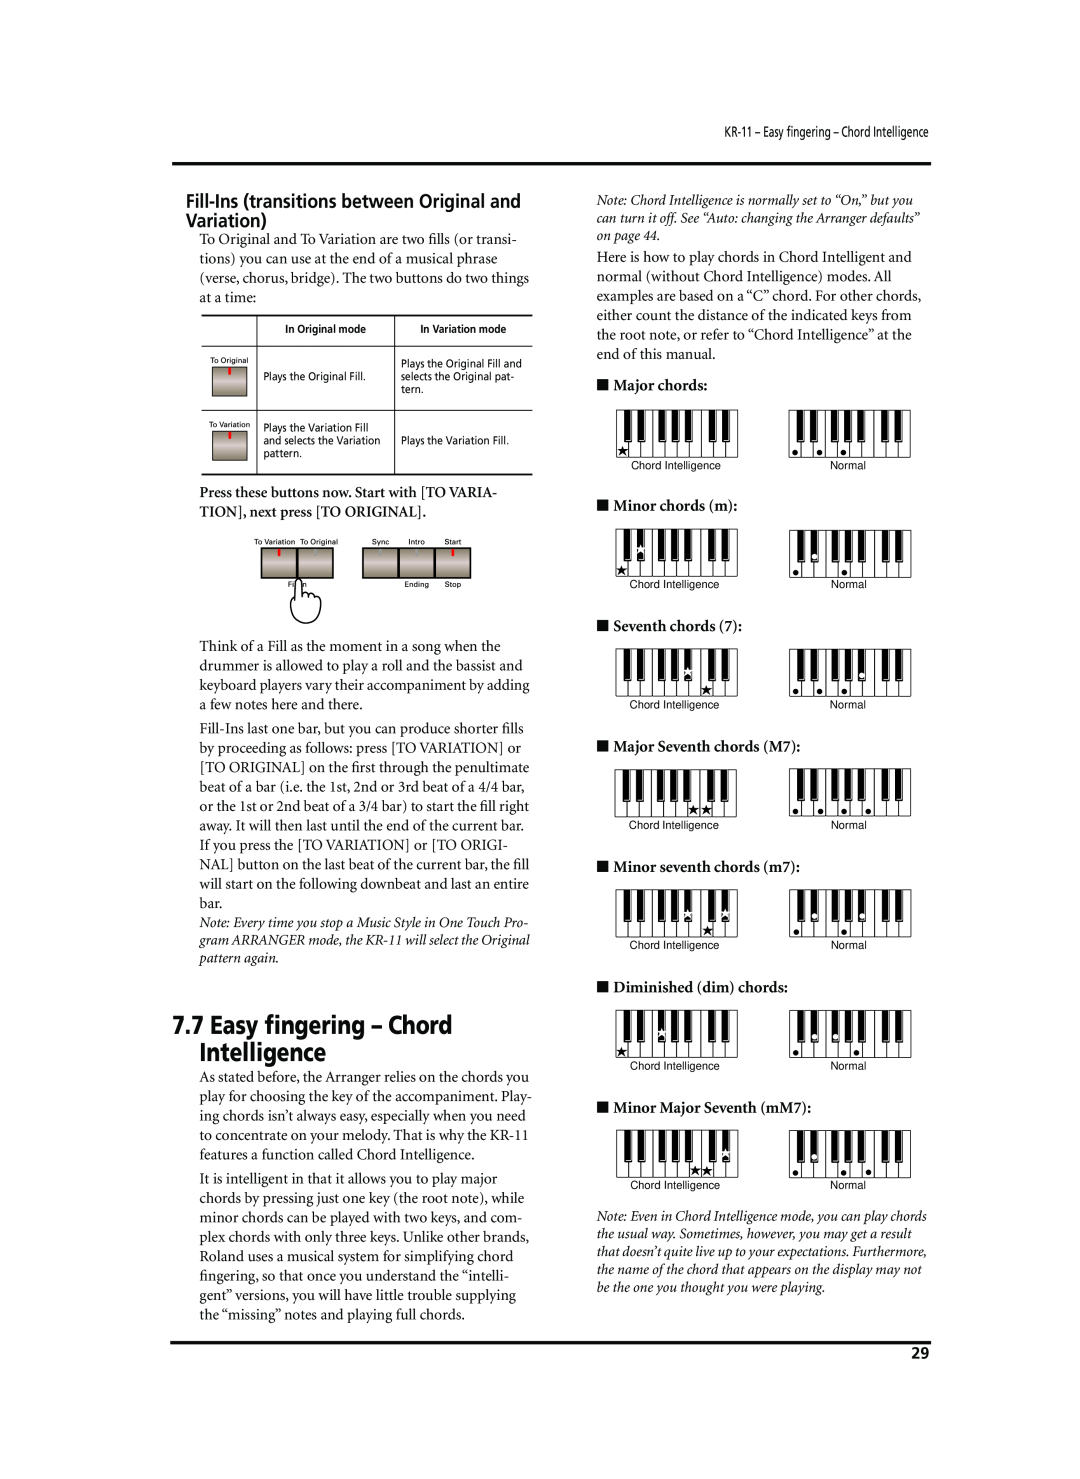 Roland KR-11 owner manual Easy ﬁngering - Chord Intelligence, Fill-Ins transitions between Original and Variation 